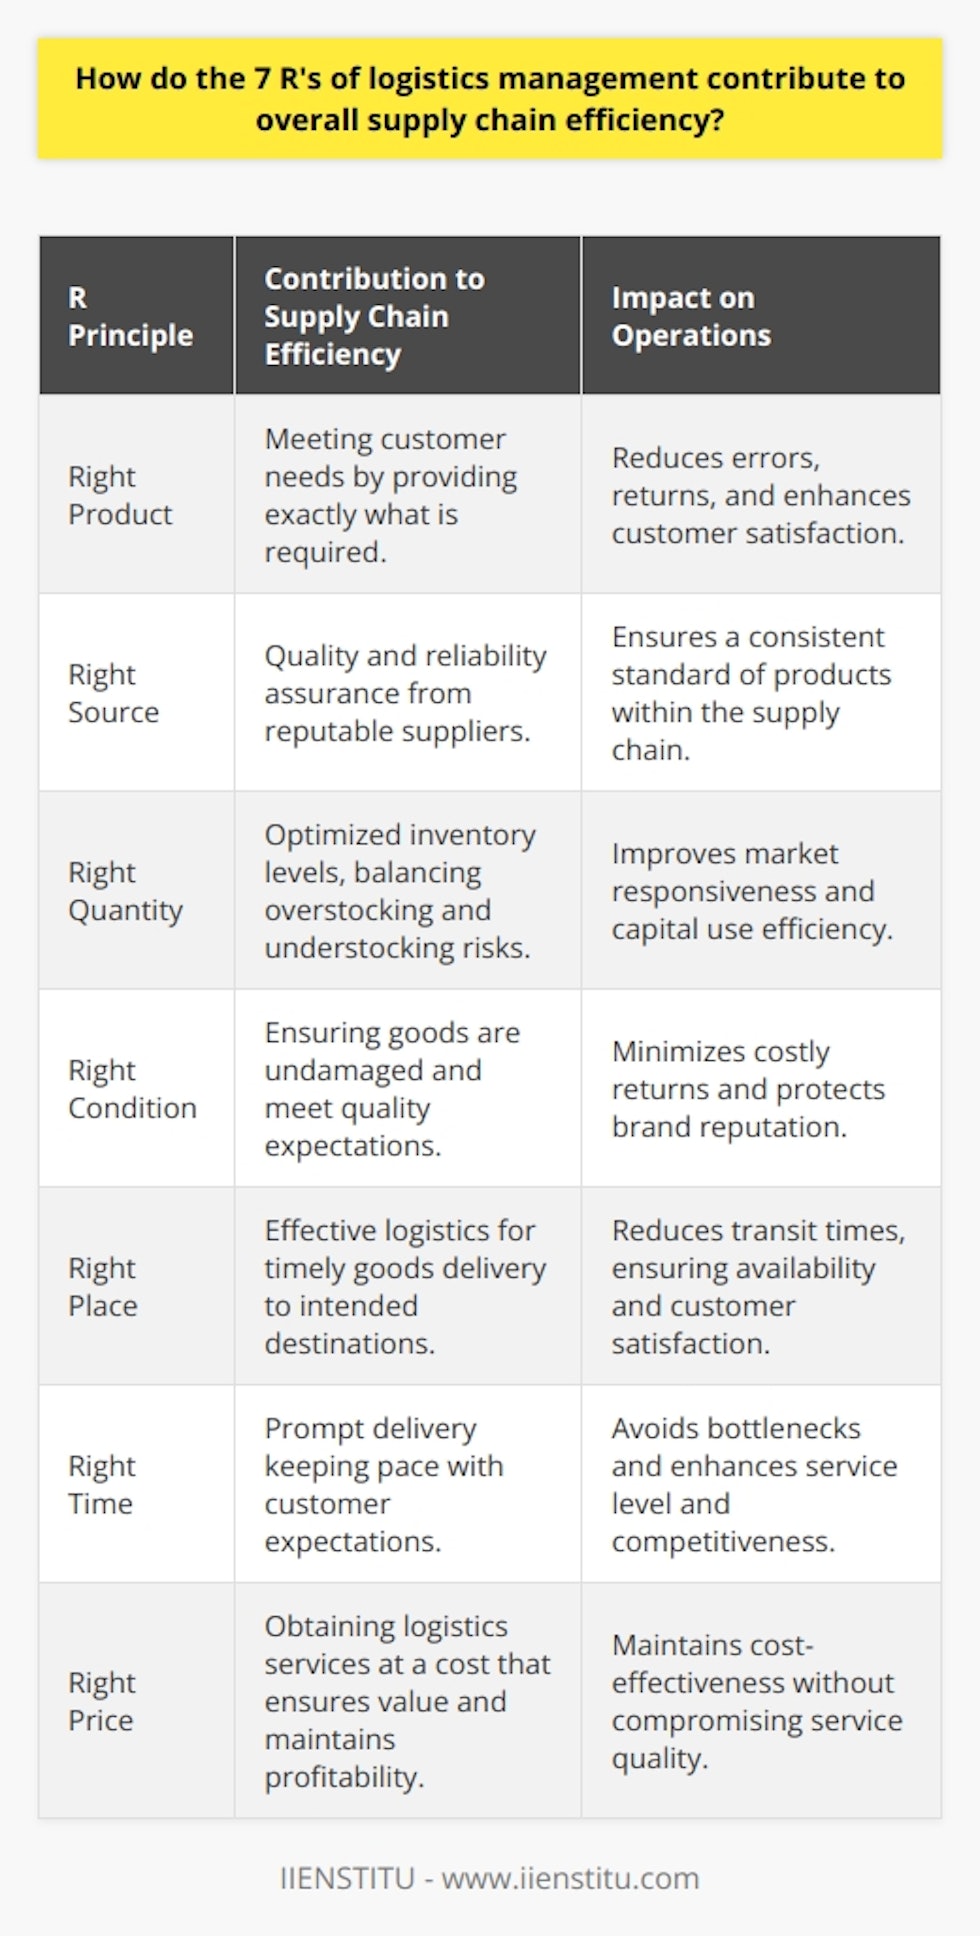 The 7 R's of logistics management serve as a beacon guiding companies toward supply chain excellence. These principles form a comprehensive framework that, when adhered to, can significantly enhance the efficiency and effectiveness of supply chain operations. The cumulative effect of these R's on supply chain performance can be seen in the smooth orchestration of logistics processes from procurement to customer delivery.**Right Product**: Ensuring that the correct product is being sourced and delivered is fundamental to meeting customer needs. This principle is an anchor in maintaining the integrity of the supply chain, as errors in product specification can lead to a ripple effect of inefficiencies, including returns, customer dissatisfaction, and a tarnish on the company's reputation.**Right Source**: Sourcing from the right supplier determines the quality and reliability of the goods in the supply chain. Establishing a robust supplier selection process is critical for maintaining a smooth inflow of high-quality products. Suppliers must be evaluated based on their ability to deliver the right products, in the right quantities, at consistent standards.**Right Quantity**: Managing the right quantity of a product is vital for optimizing inventory levels. This requires a delicate balance to prevent overstocking, which ties up capital and storage space, as well as understocking, which can result in missed sales opportunities and customer dissatisfaction. Sound inventory management practices help companies maintain this balance, ensuring responsiveness to market demand.**Right Condition**: Products must arrive in perfect condition to fulfill customer expectations and maintain brand credibility. The right condition is achieved through appropriate packaging, storage, and handling during transportation. Quality control mechanisms must be strictly enforced to avoid the cost implications of damaged goods and returns.**Right Place**: The destination of goods must align with the end user or the next phase in the supply chain. Fostering an effective logistics network capable of delivering goods to the right place is crucial in minimizing transit times and ensuring goods are available where they are needed.**Right Time**: Timeliness is synonymous with competitiveness in supply chain management. Delays can trigger a cascade of setbacks, from bottlenecks to missed market opportunities. Companies must strive for prompt delivery to keep up with customer expectations and maintain a high service level.**Right Price**: The price at which logistics services are obtained should reflect value for money and contribute to the financial health of the enterprise. Negotiating the best price for logistics services without compromising quality is integral to maintaining cost-effectiveness throughout the supply chain.In the realm of supply chain and logistics management, the 7 R's form an interconnected system where the performance in one area influences the others. This cohesive approach to logistics management propels companies toward operational excellence, helping to carve out a sustainable competitive advantage by boosting customer satisfaction, trimming down costs, and ensuring continuous improvement of supply chain processes. Therefore, practitioners and businesses that meticulously apply the 7 R's typically see improvements in their overall supply chain efficiency, which is essential in today’s fast-paced and ever-evolving market landscape.